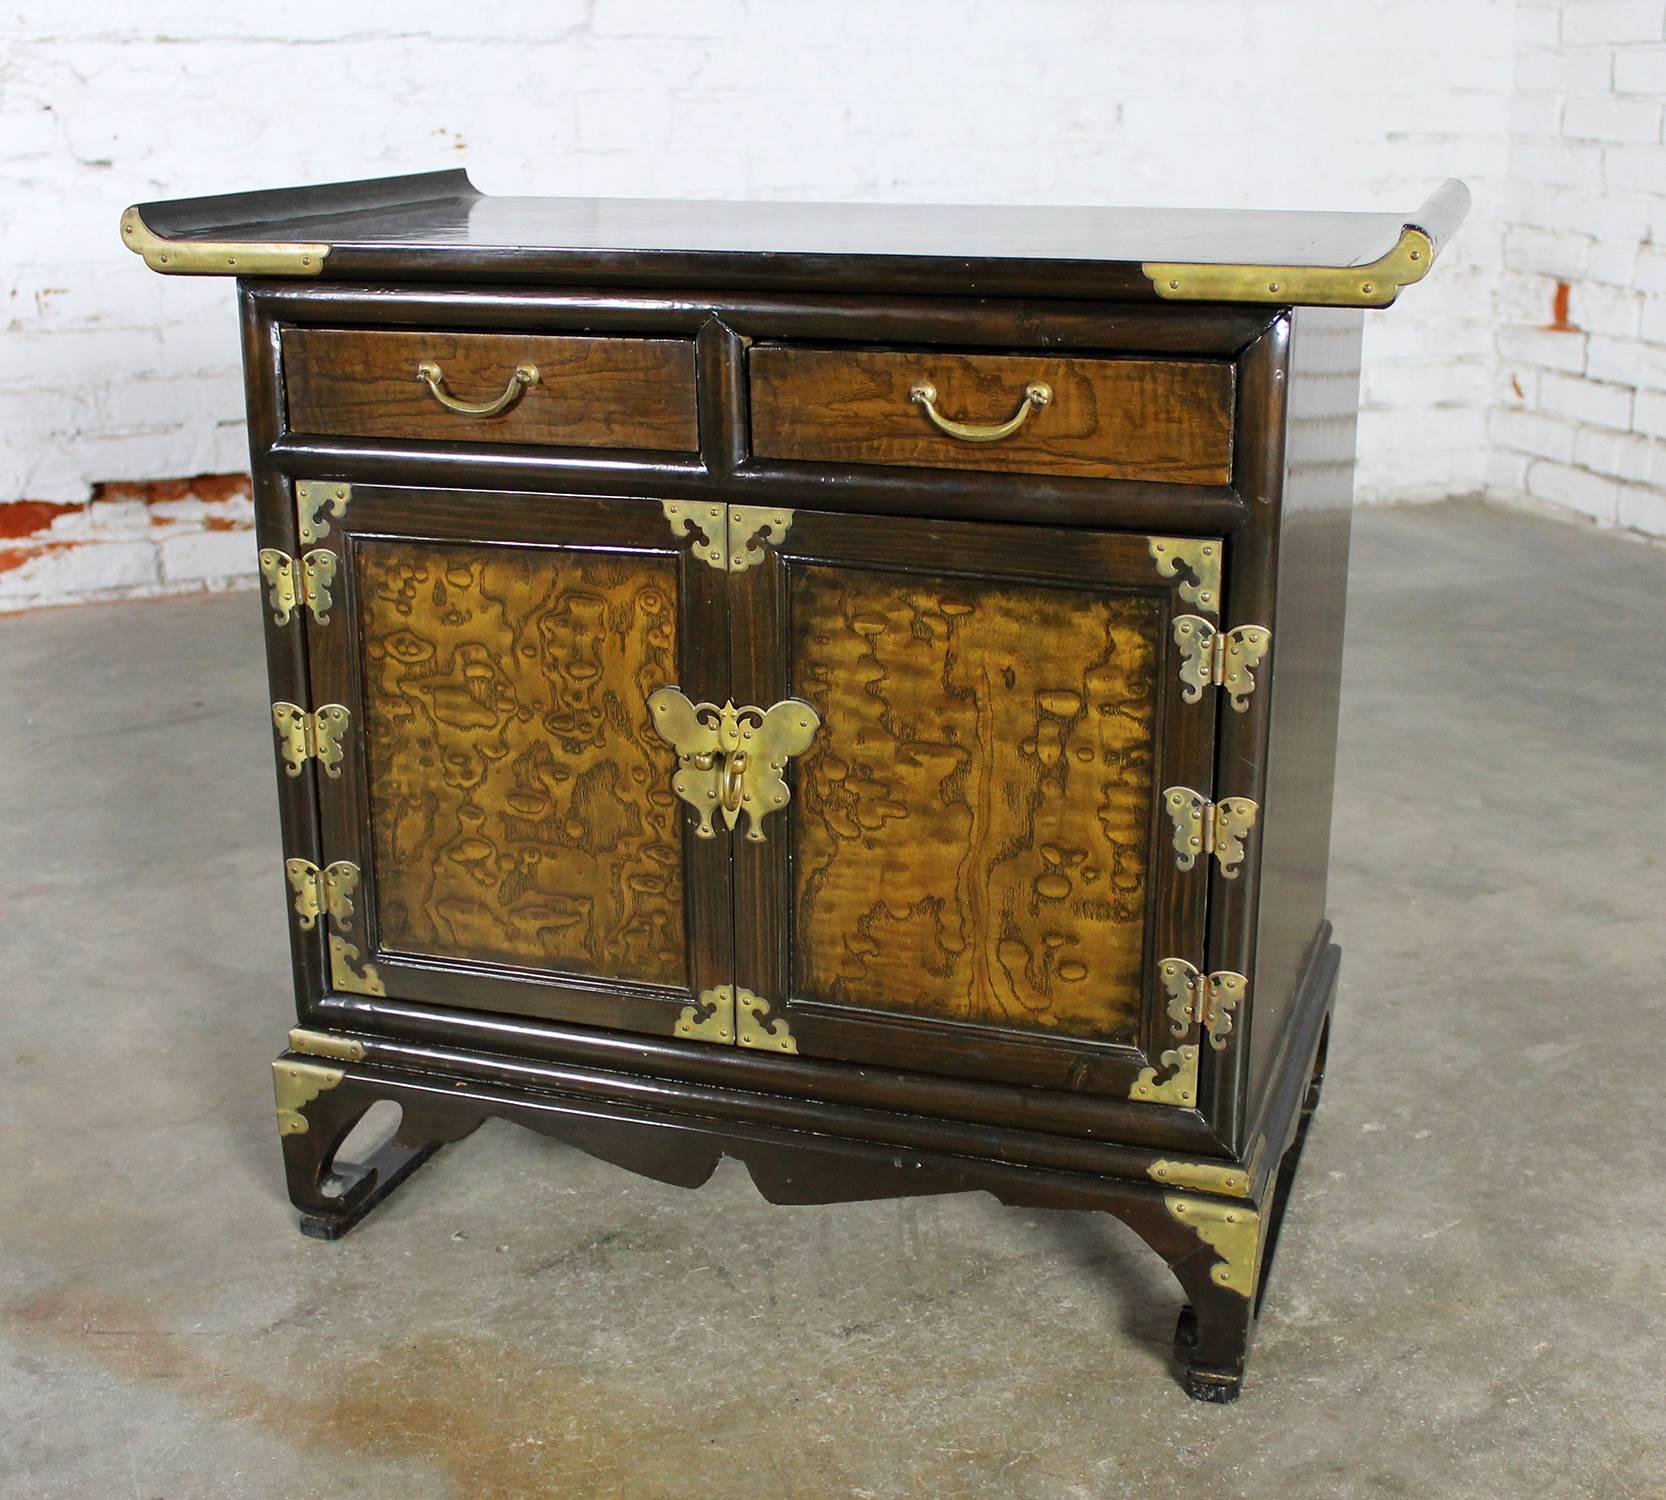 Wonderful small Korean design scholar’s accent cabinet, chest or end table with brass butterflies and other decorative trim and hardware. In good vintage condition, circa 20th century.

Sometimes you need just the right little piece of furniture